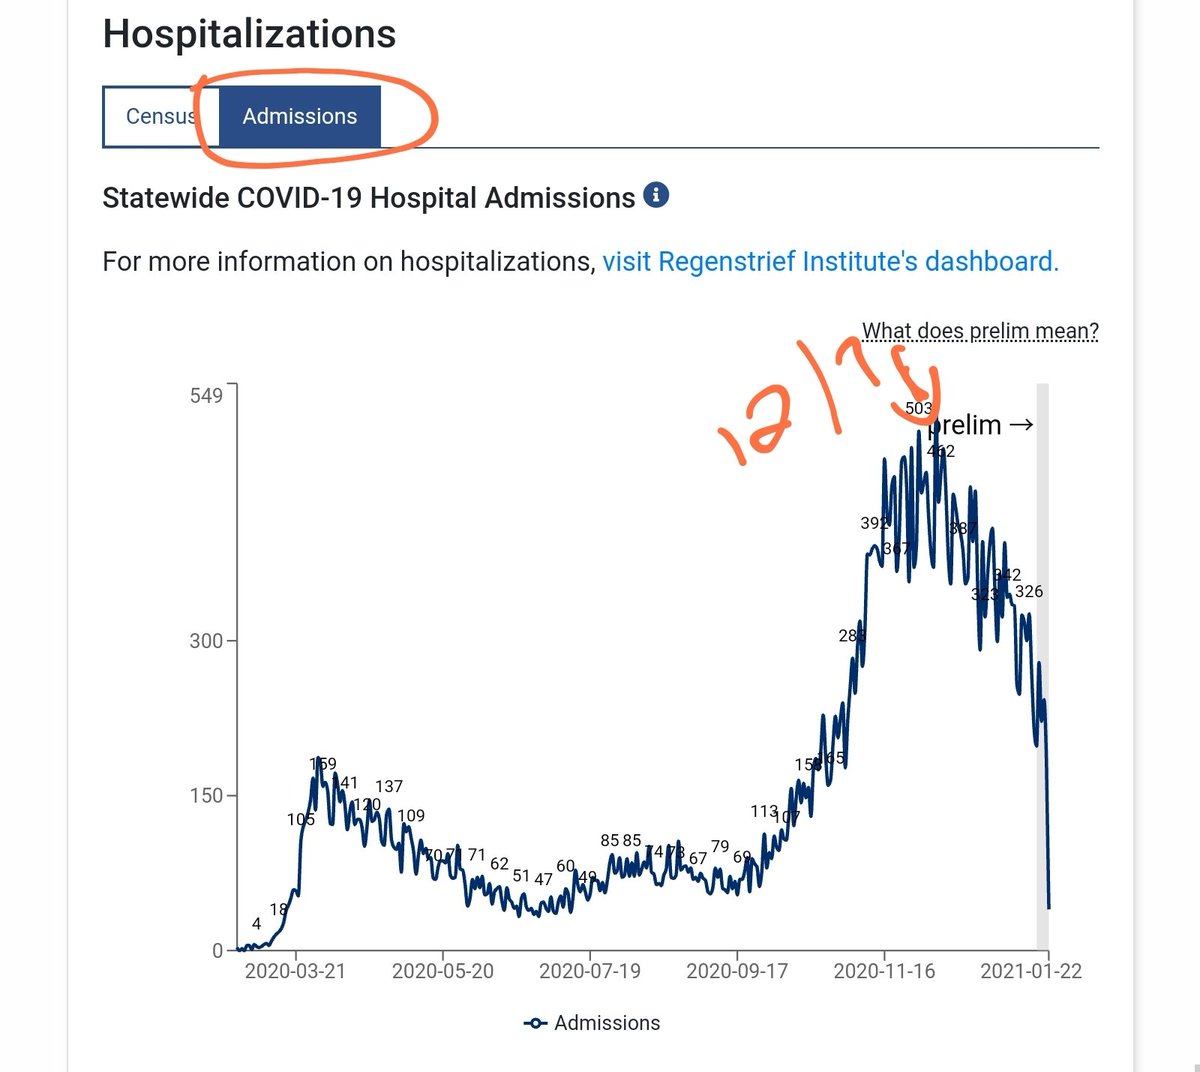 COVID hospital admissions ALSO peaked mid-December3/x